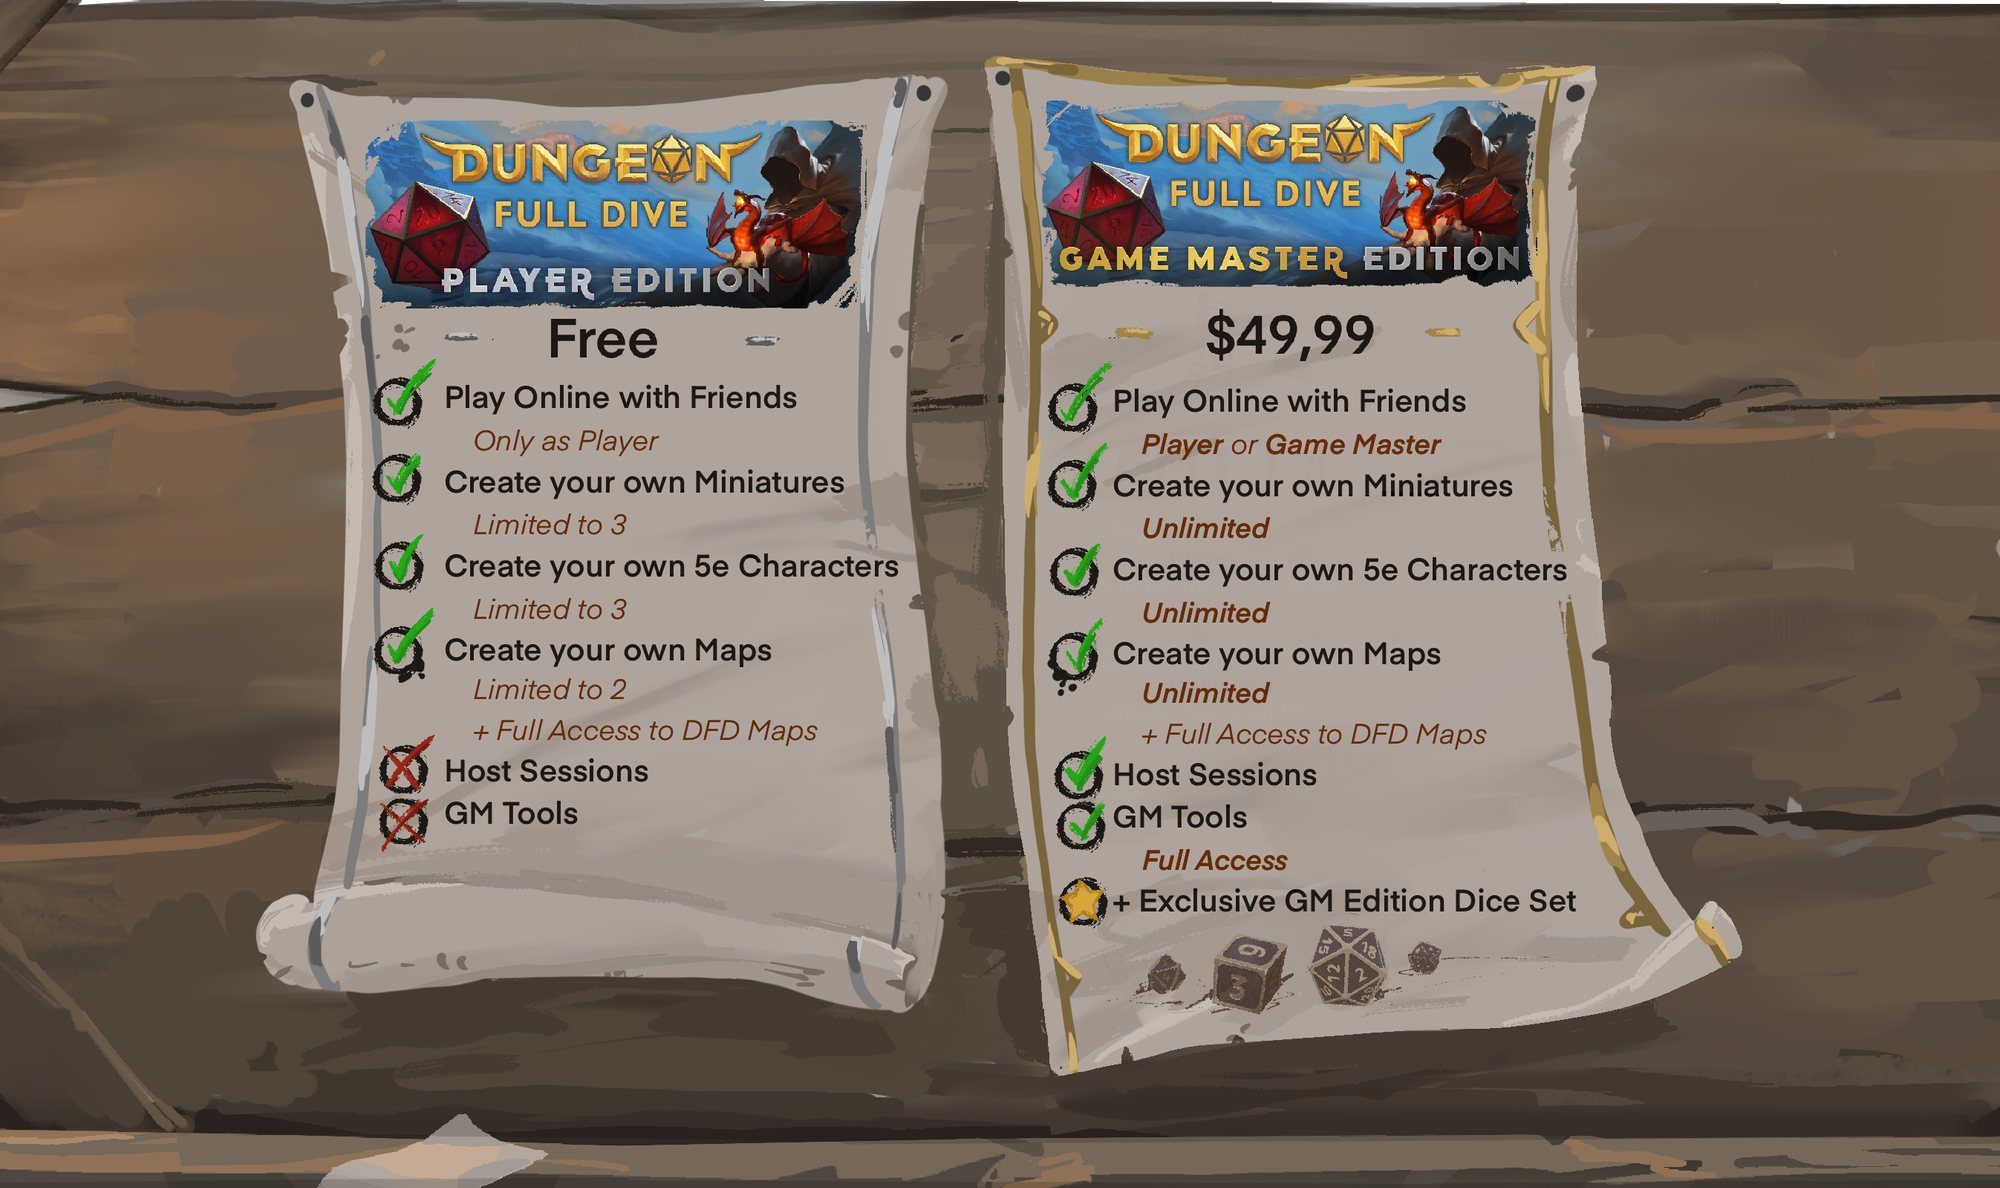 Dungeon Full Dive Will Be Free For Players, $50 For GMs